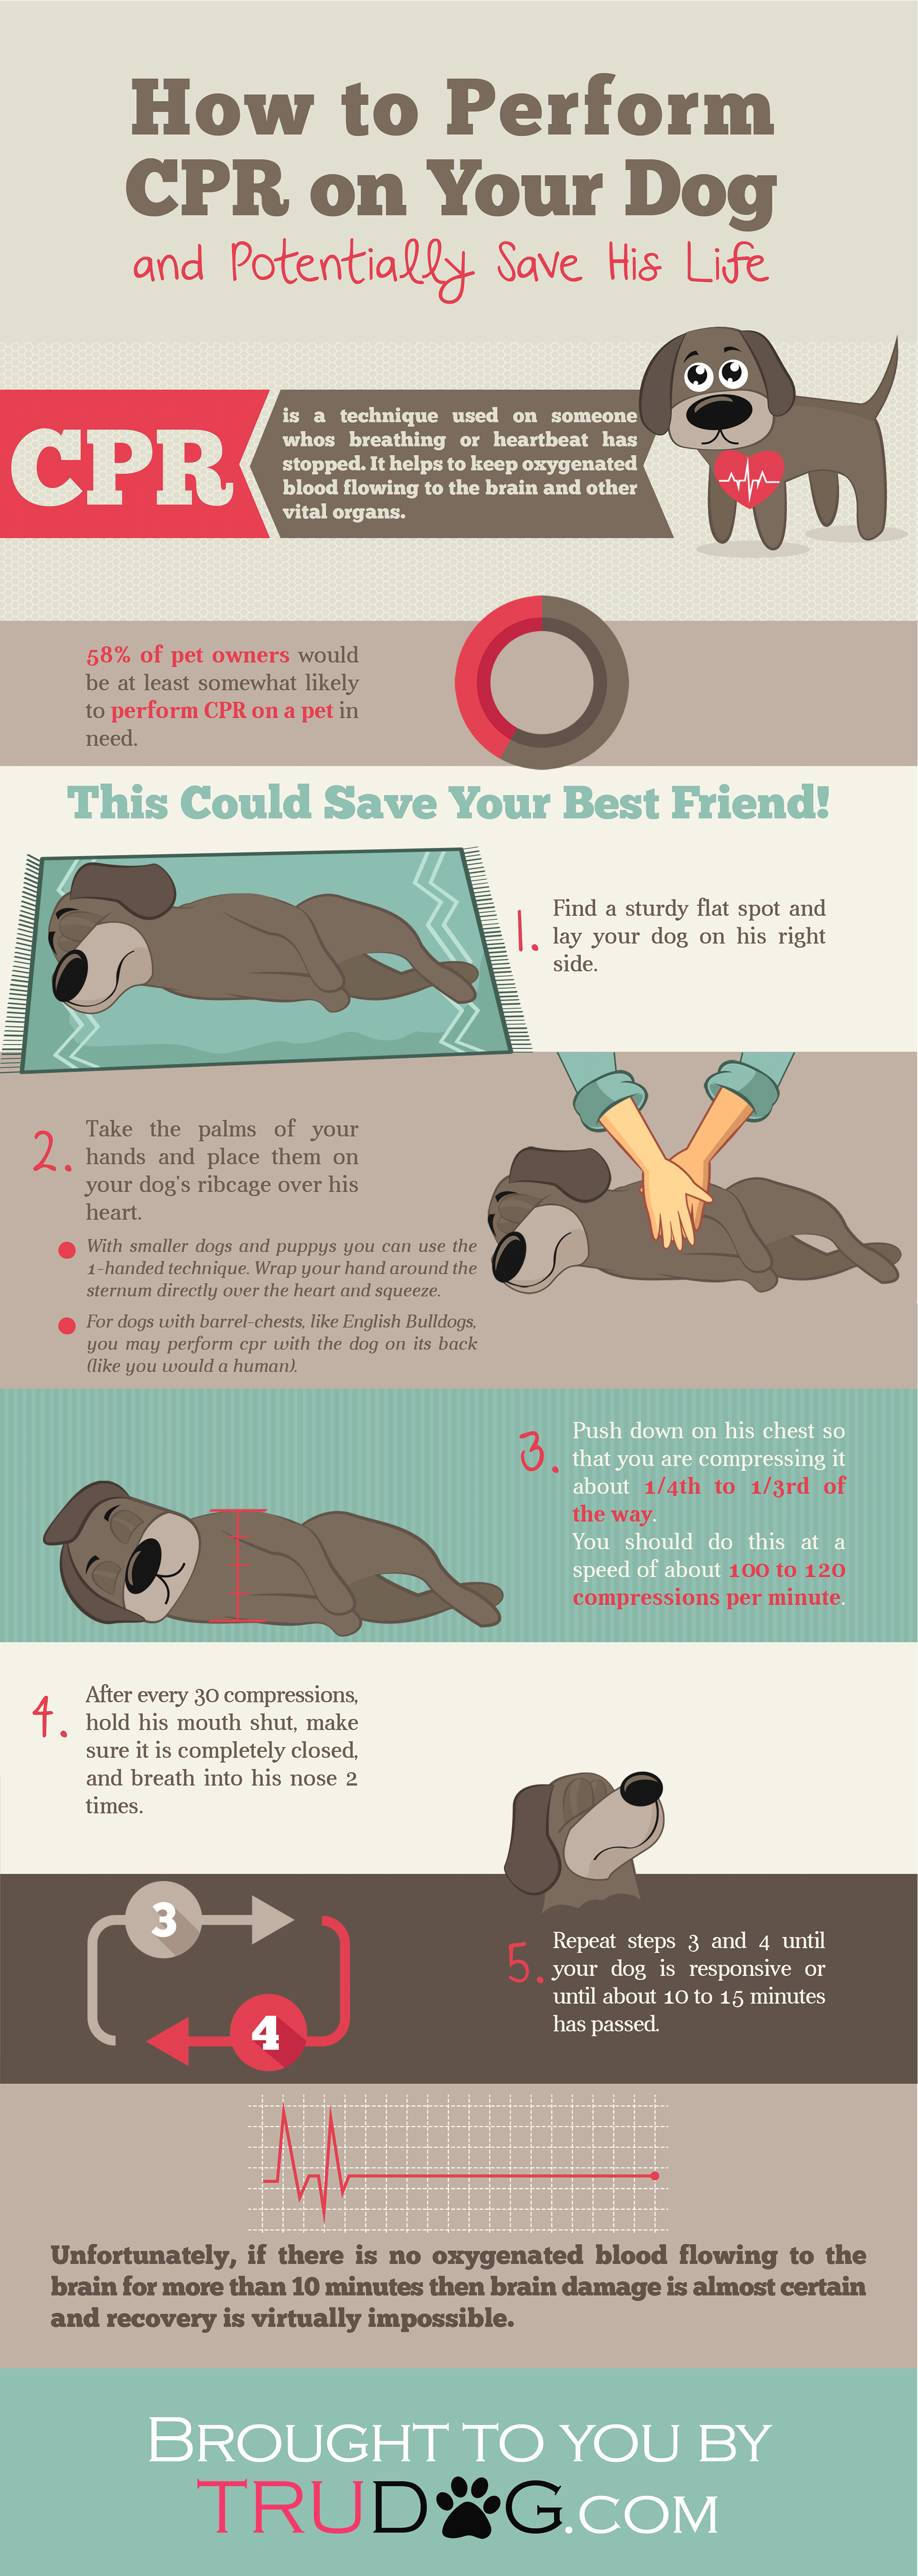 [INFOGRAPHIC] How to Perform CPR on Your Dog